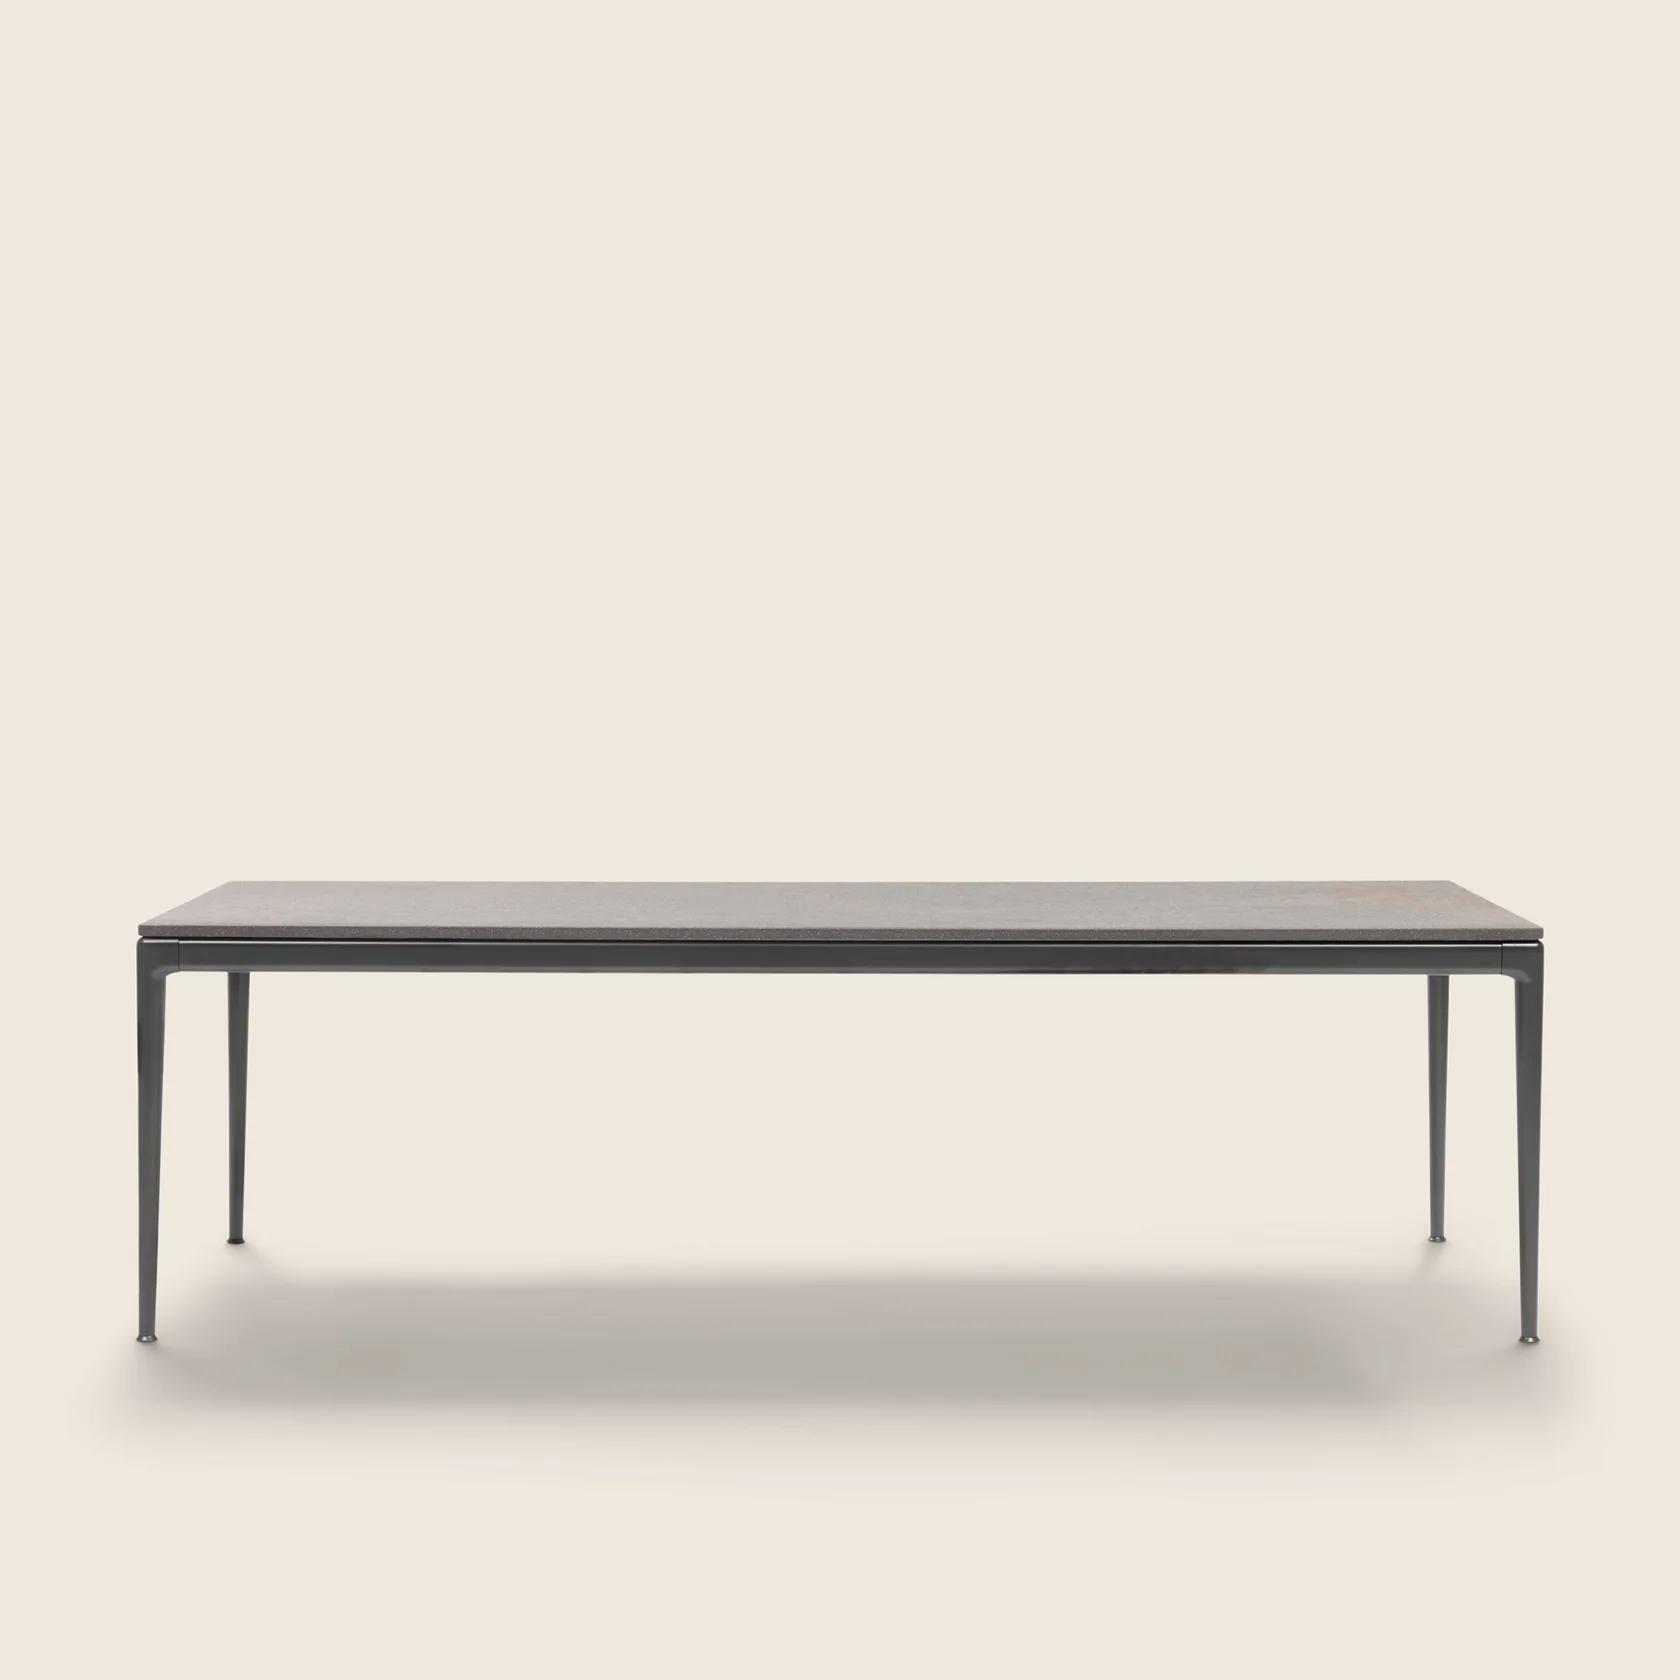 0283L0_PICO OUTDOOR_TABLE_01.png